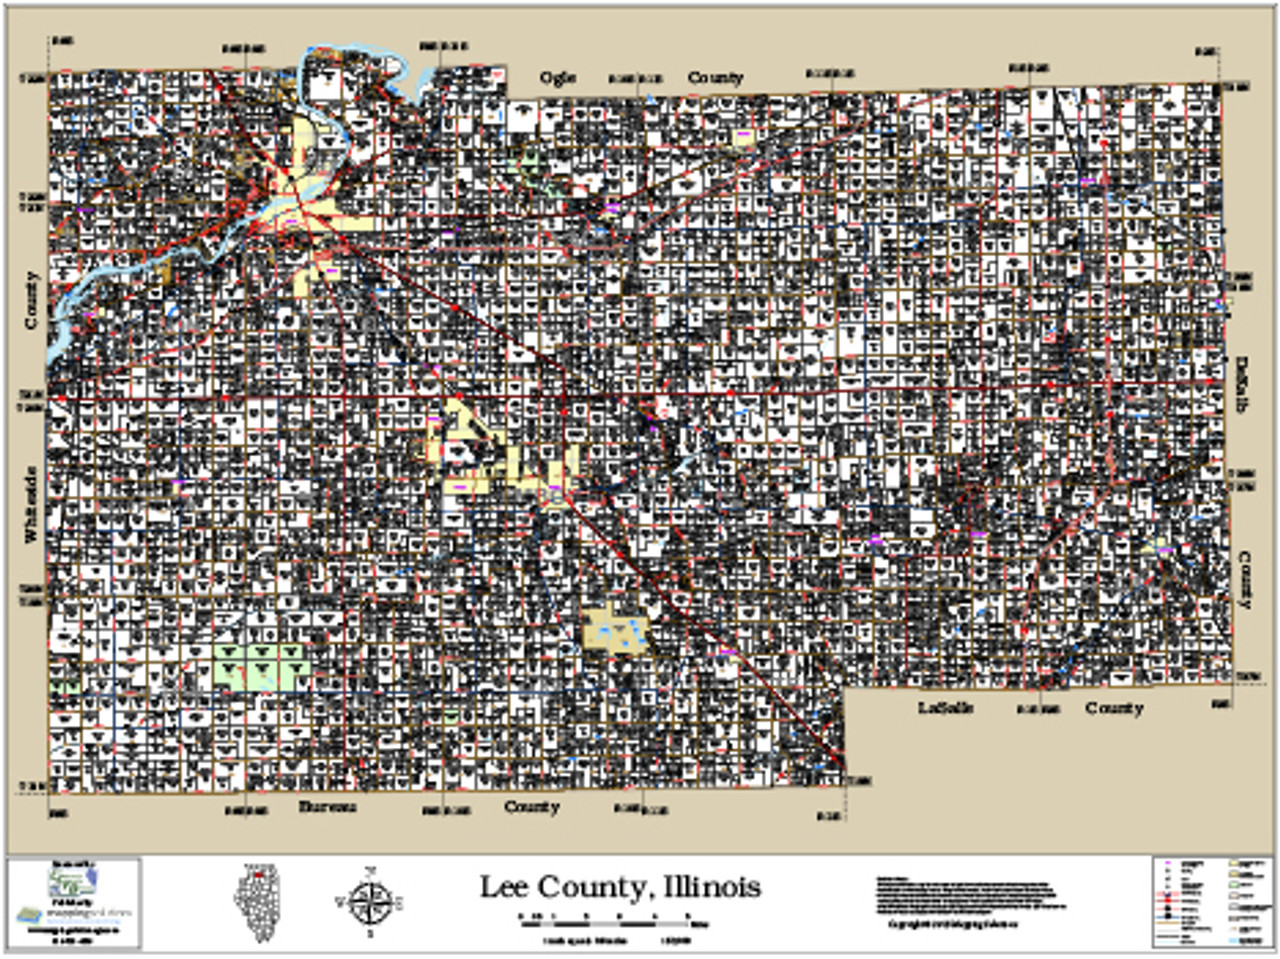 Lee County Illinois 2015 Wall Map, Lee County Parcel Map 2015, Lee County  Plat Map, Plat Book, GIS Parcel Data, Property Lines Map, Aerial Imagery |  Parcel Plat Maps for Lee County